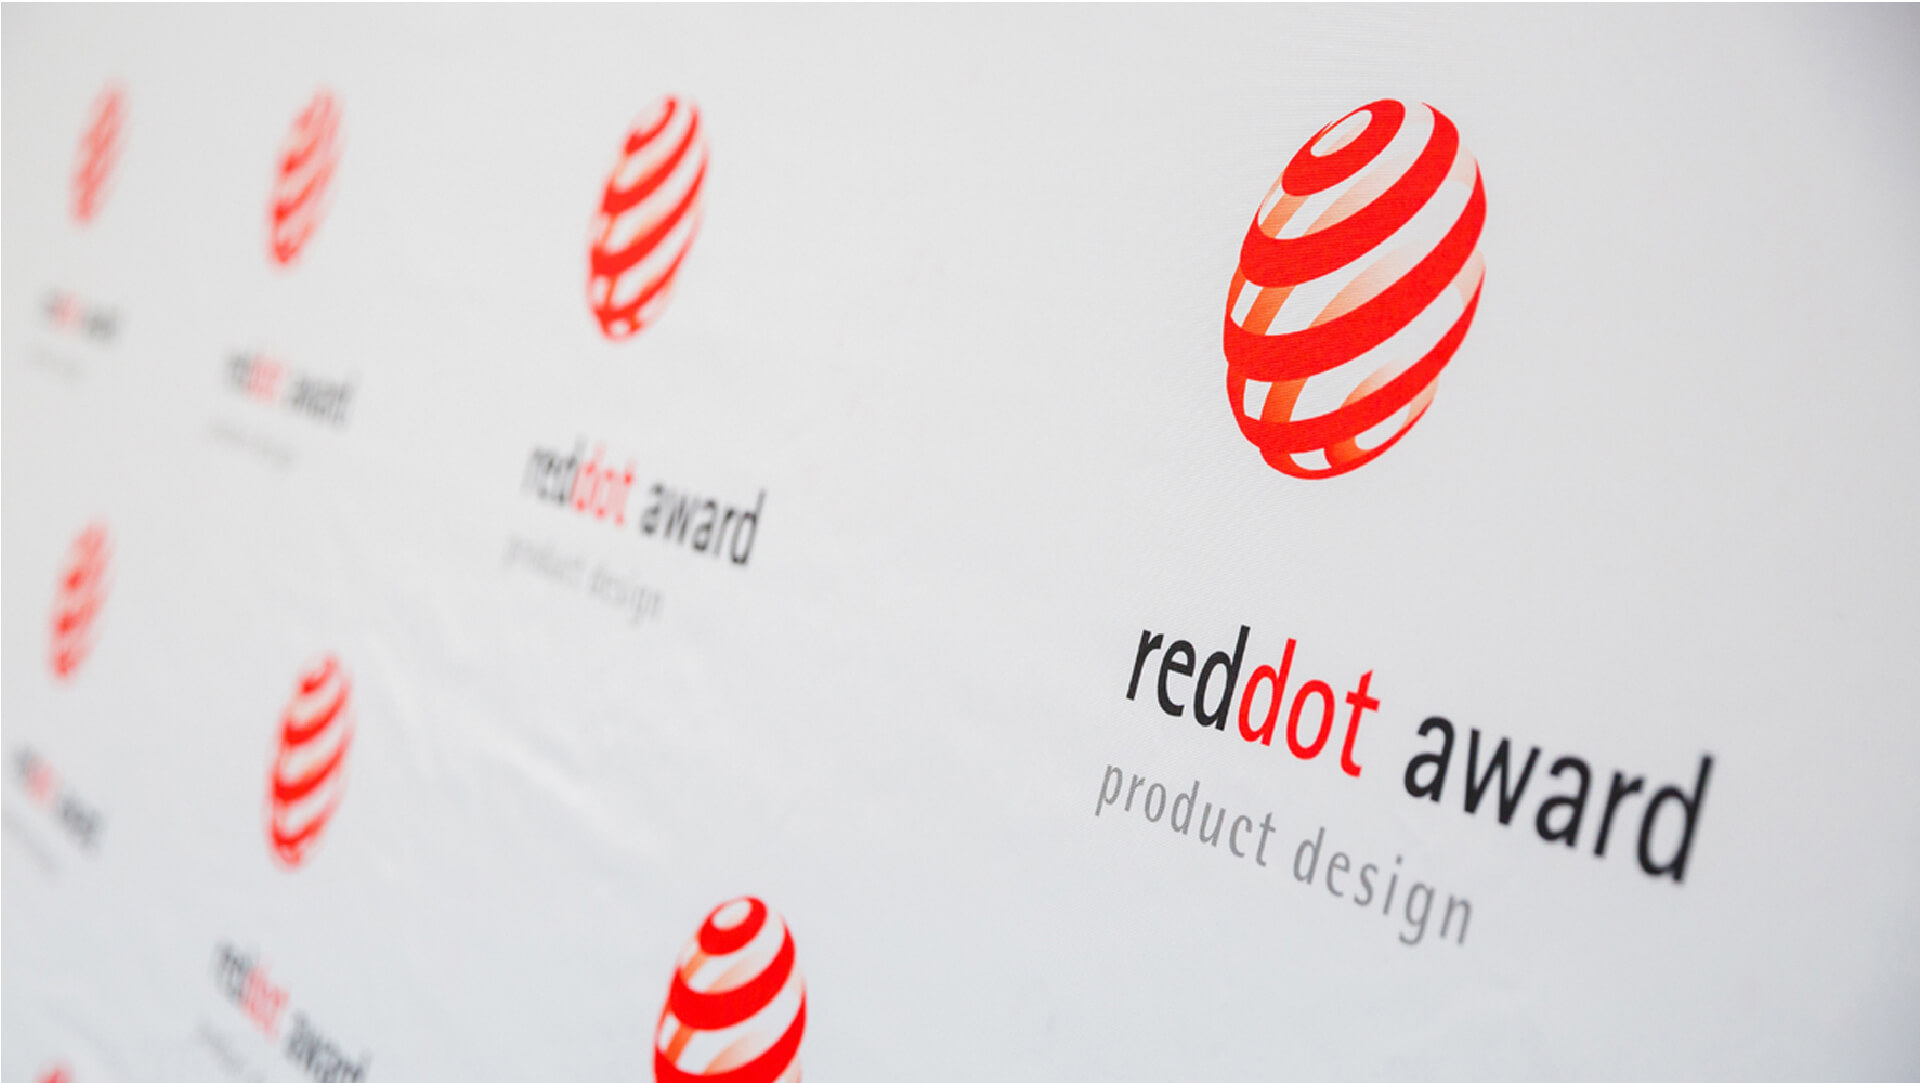 young professionals - Red Dot Award